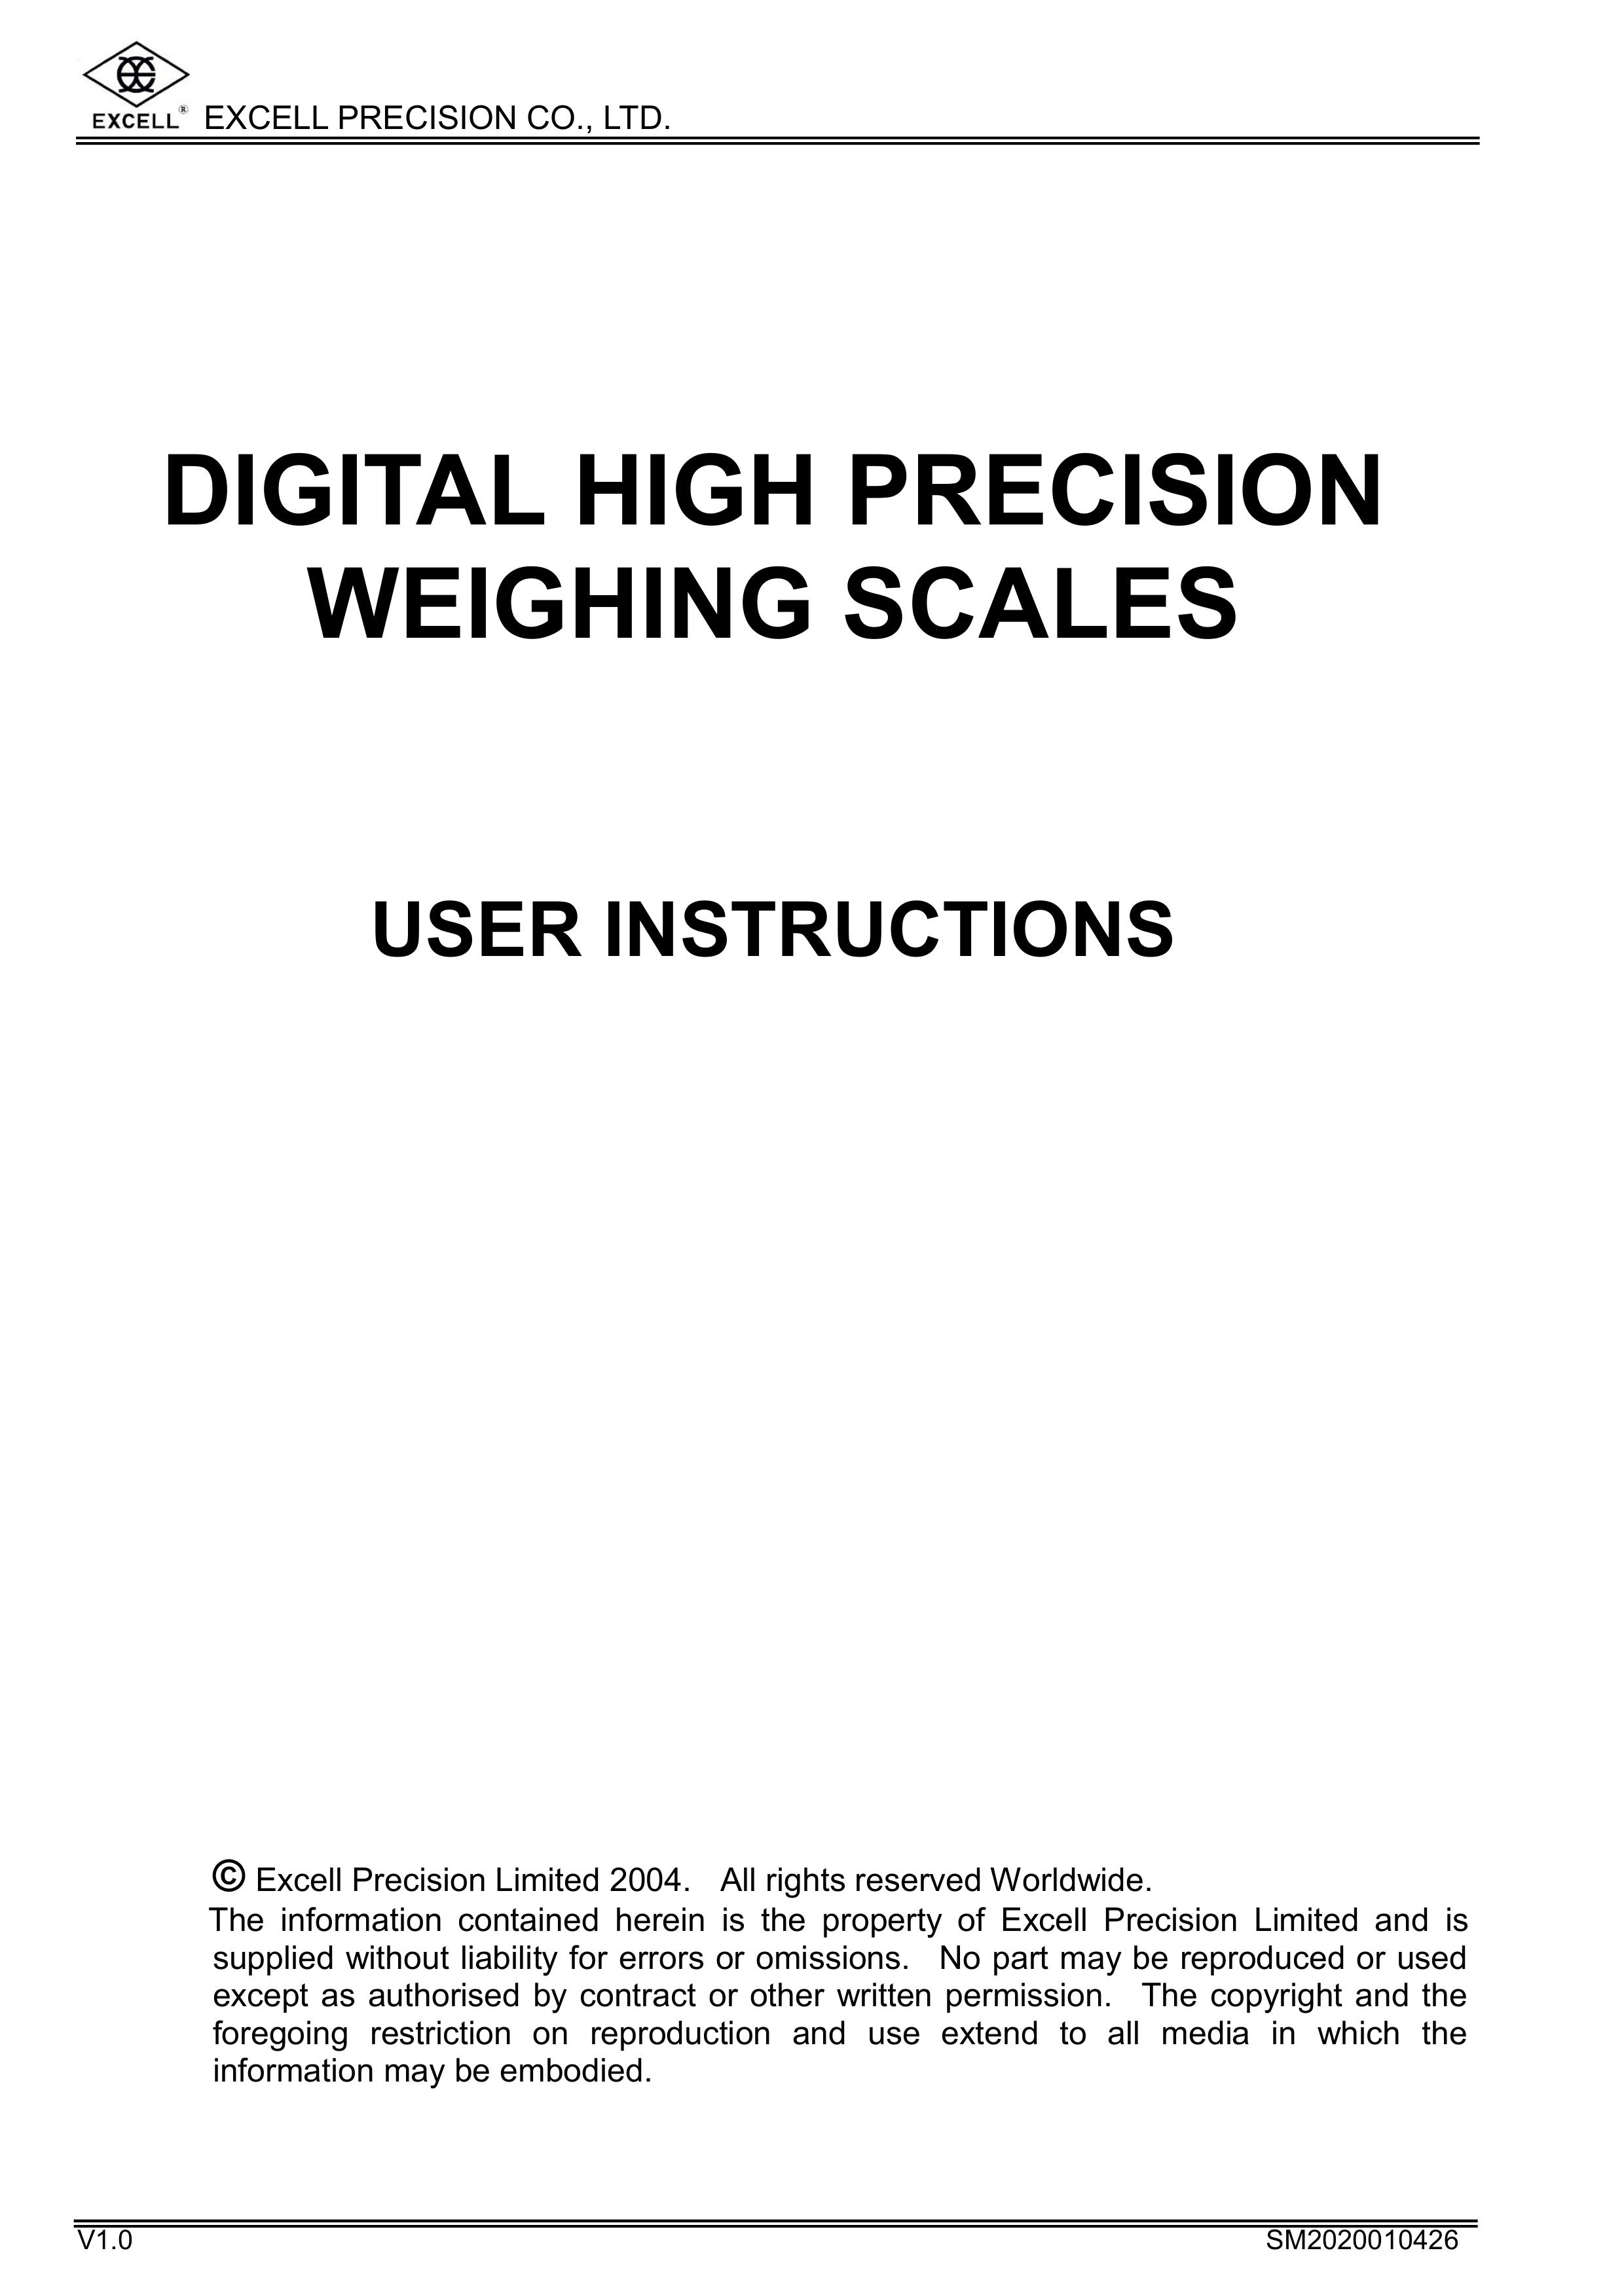 Excell Precision DIGITAL HIGH PRECISION WEIGHING SCALES Scale User Manual